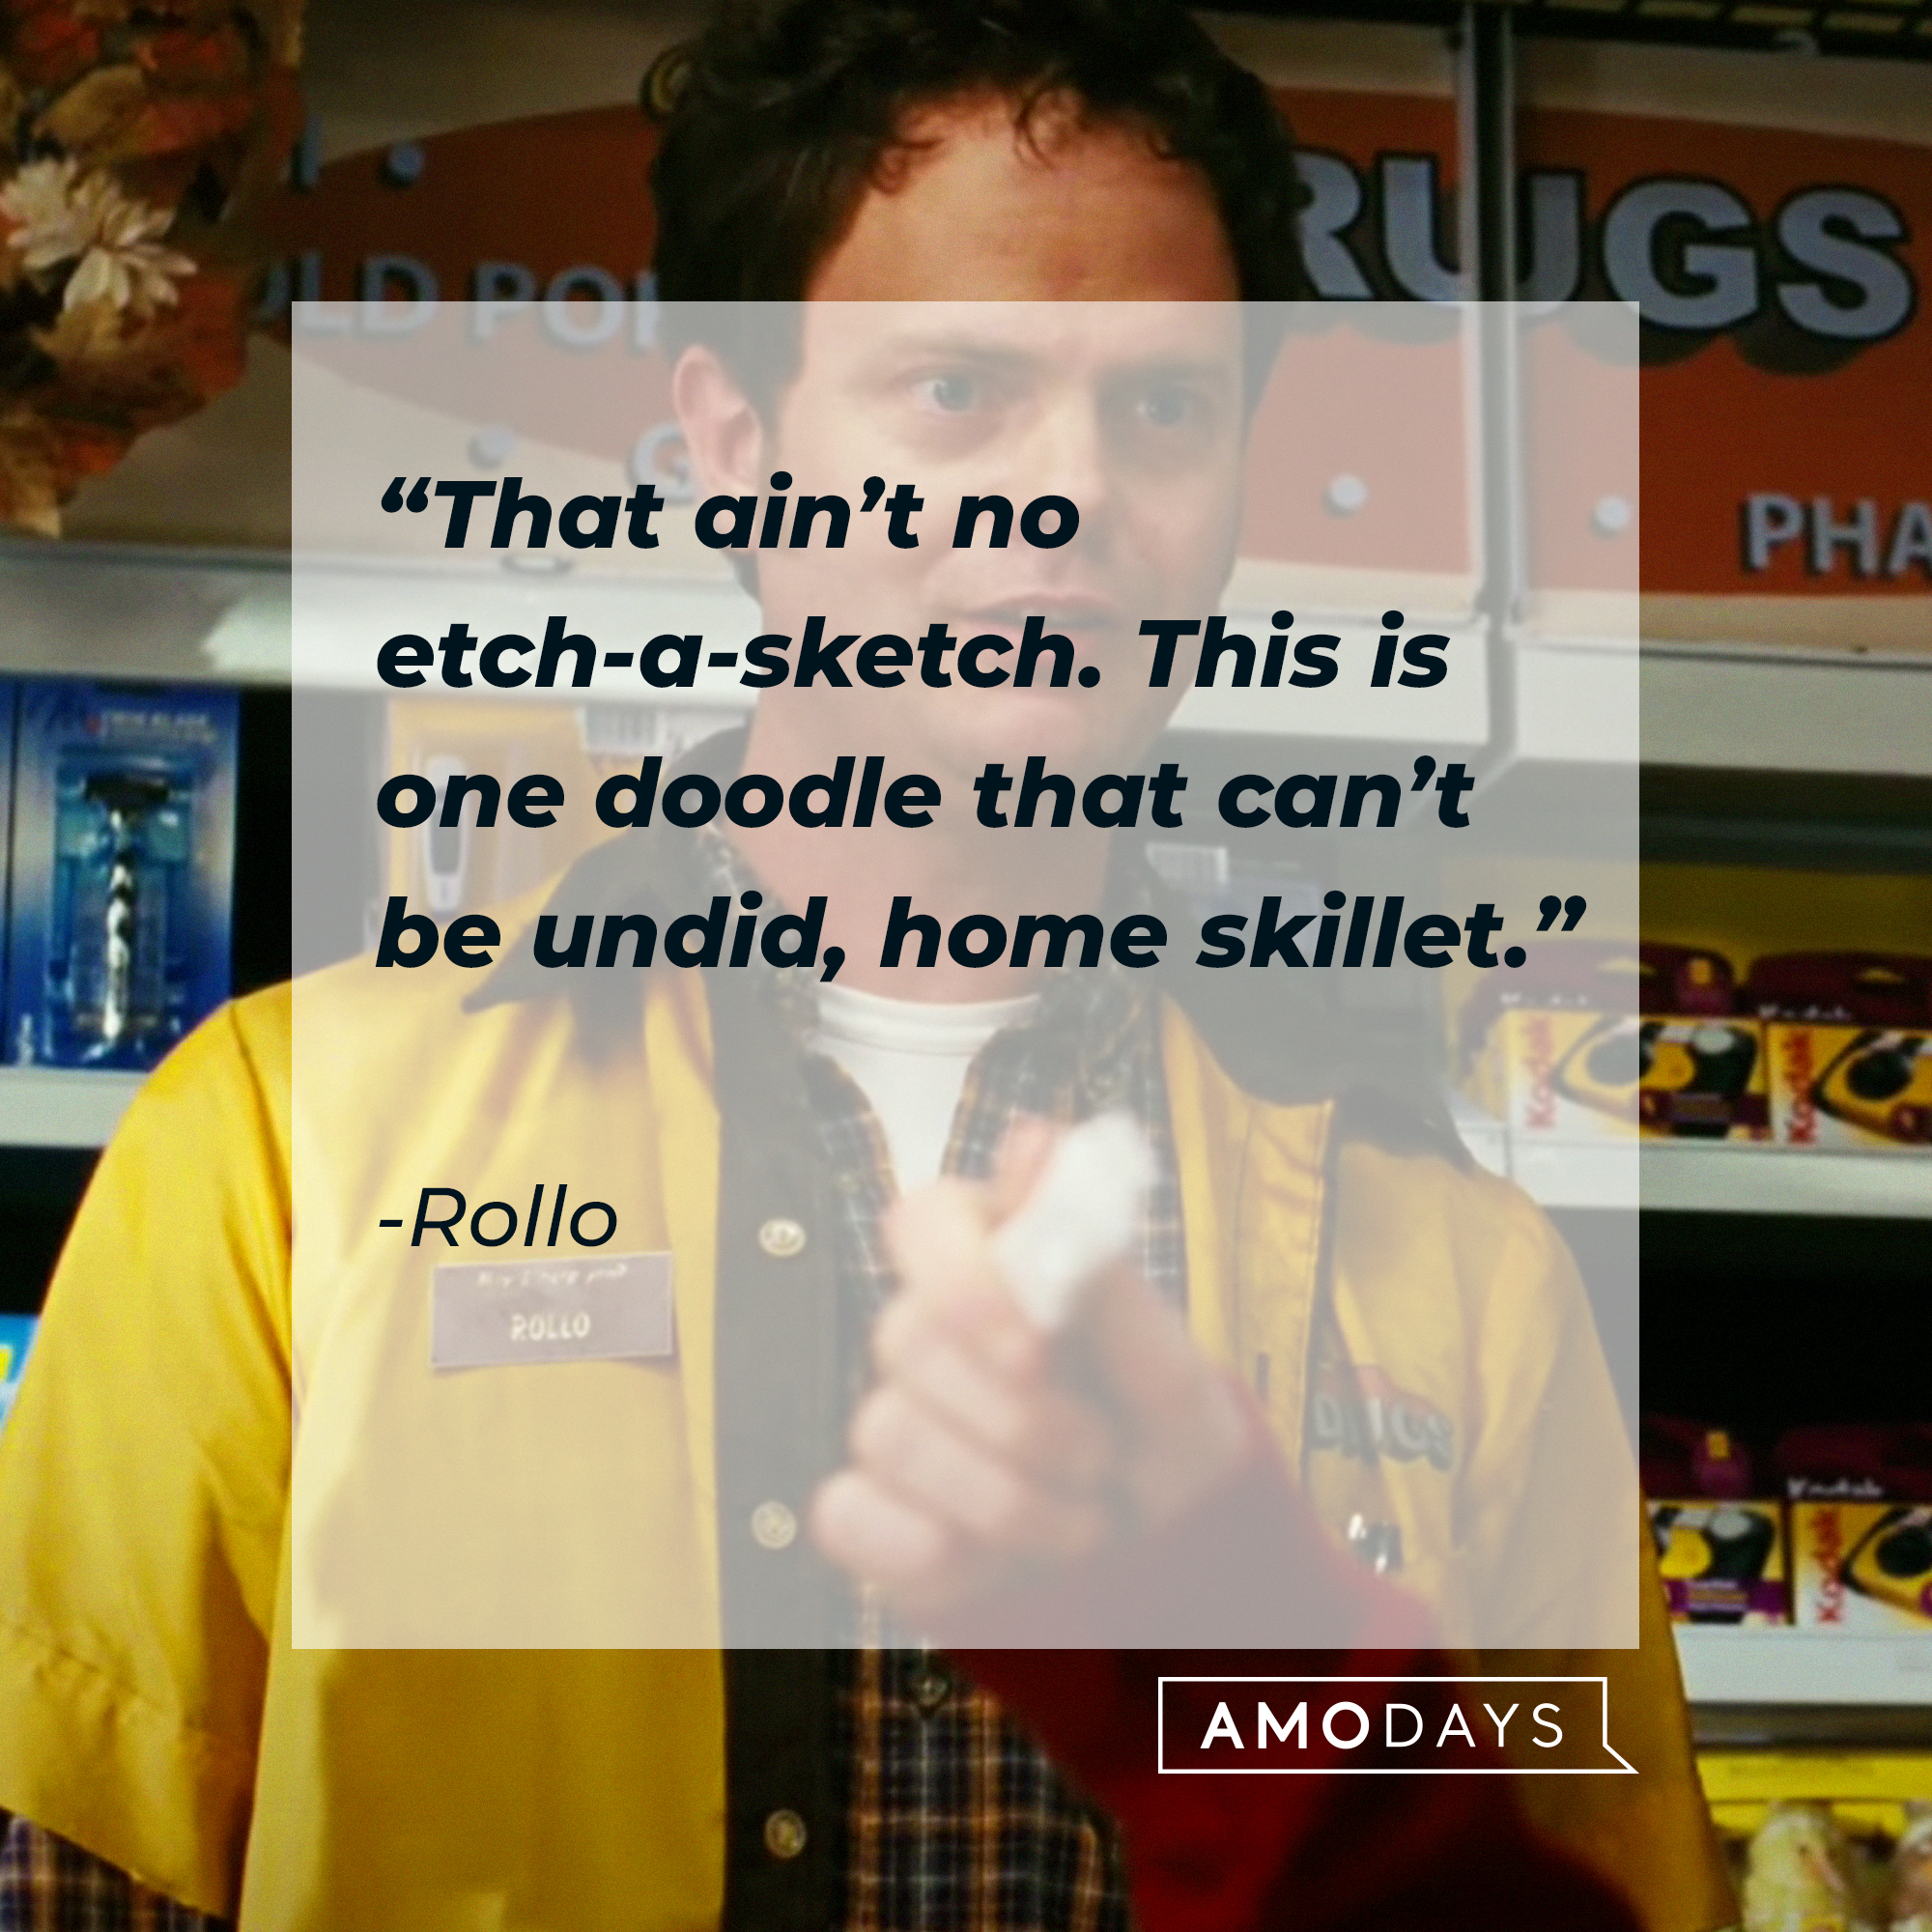 Rollo, with his quote: “That ain’t no etch-a-sketch. This is one doodle that can’t be undid, home skillet.” | Source: Facebook.com/JunoTheMovie